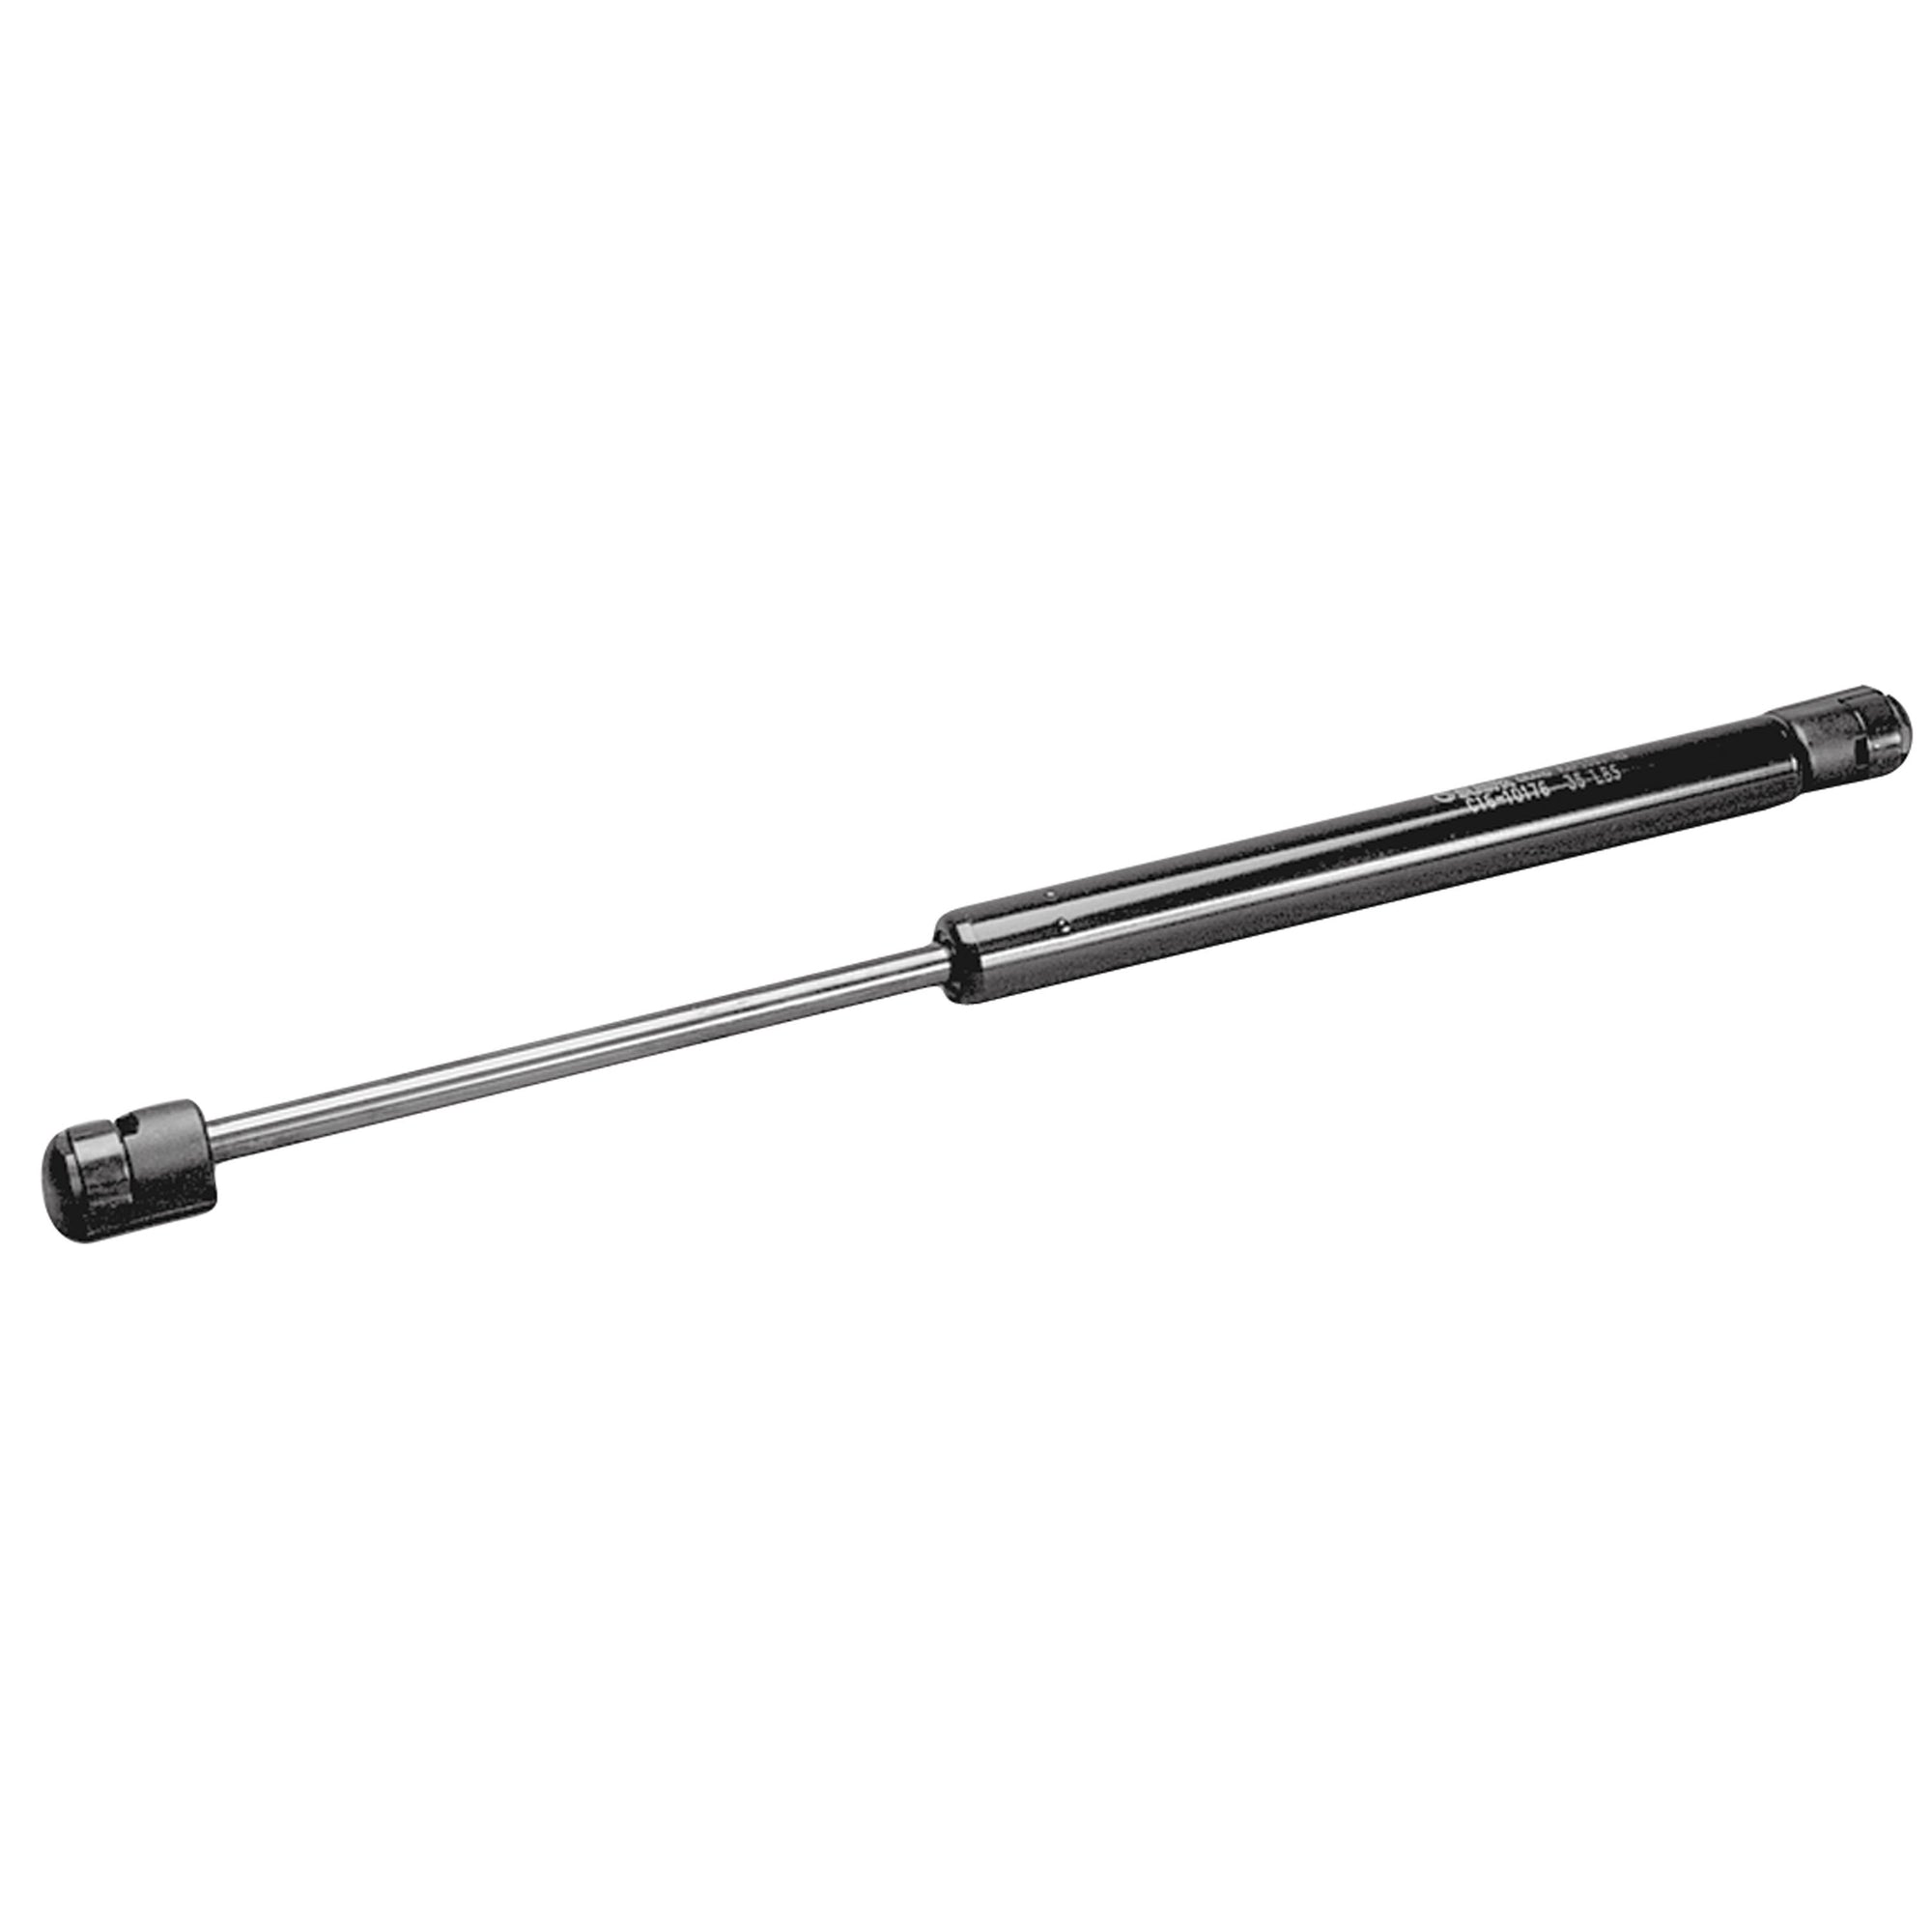 AP Products 010-077 Gas Spring - 19.69" Ext Length, 7.87" Stroke Rod Length, 80 lb. P1 Force